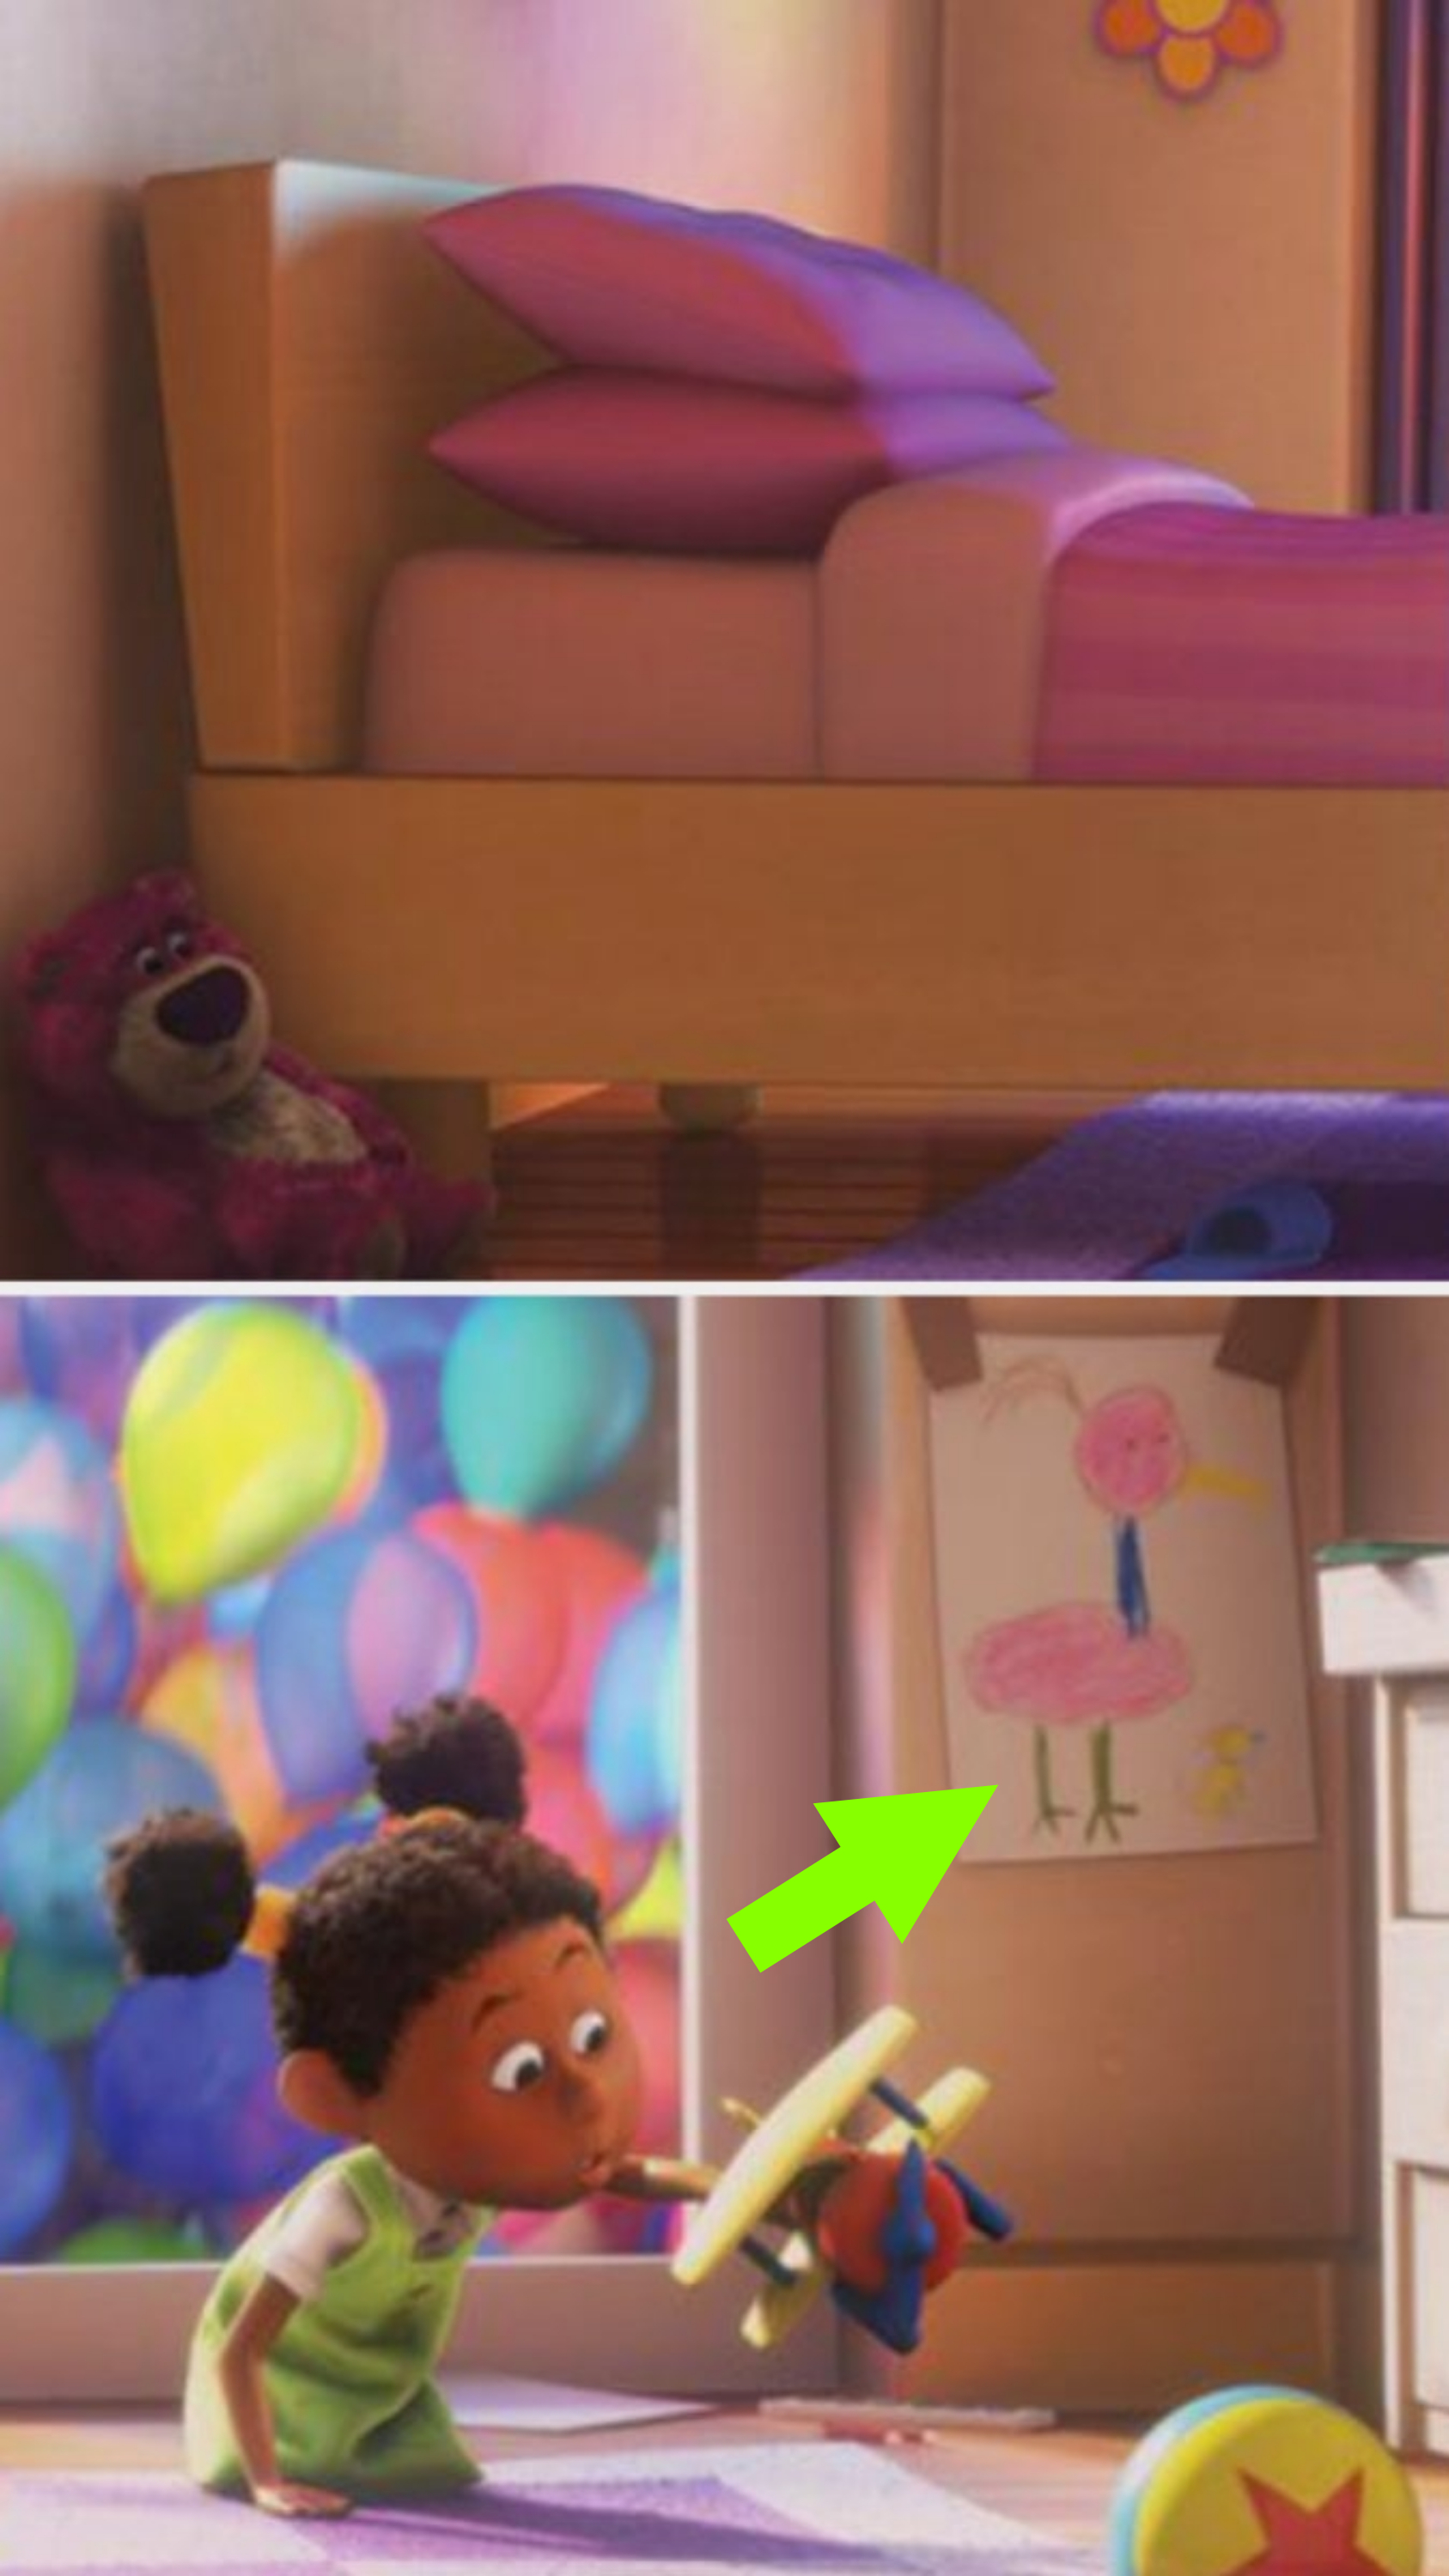 Kevin the bird and Dug the dog foreshadowing moment in &quot;Up&quot;